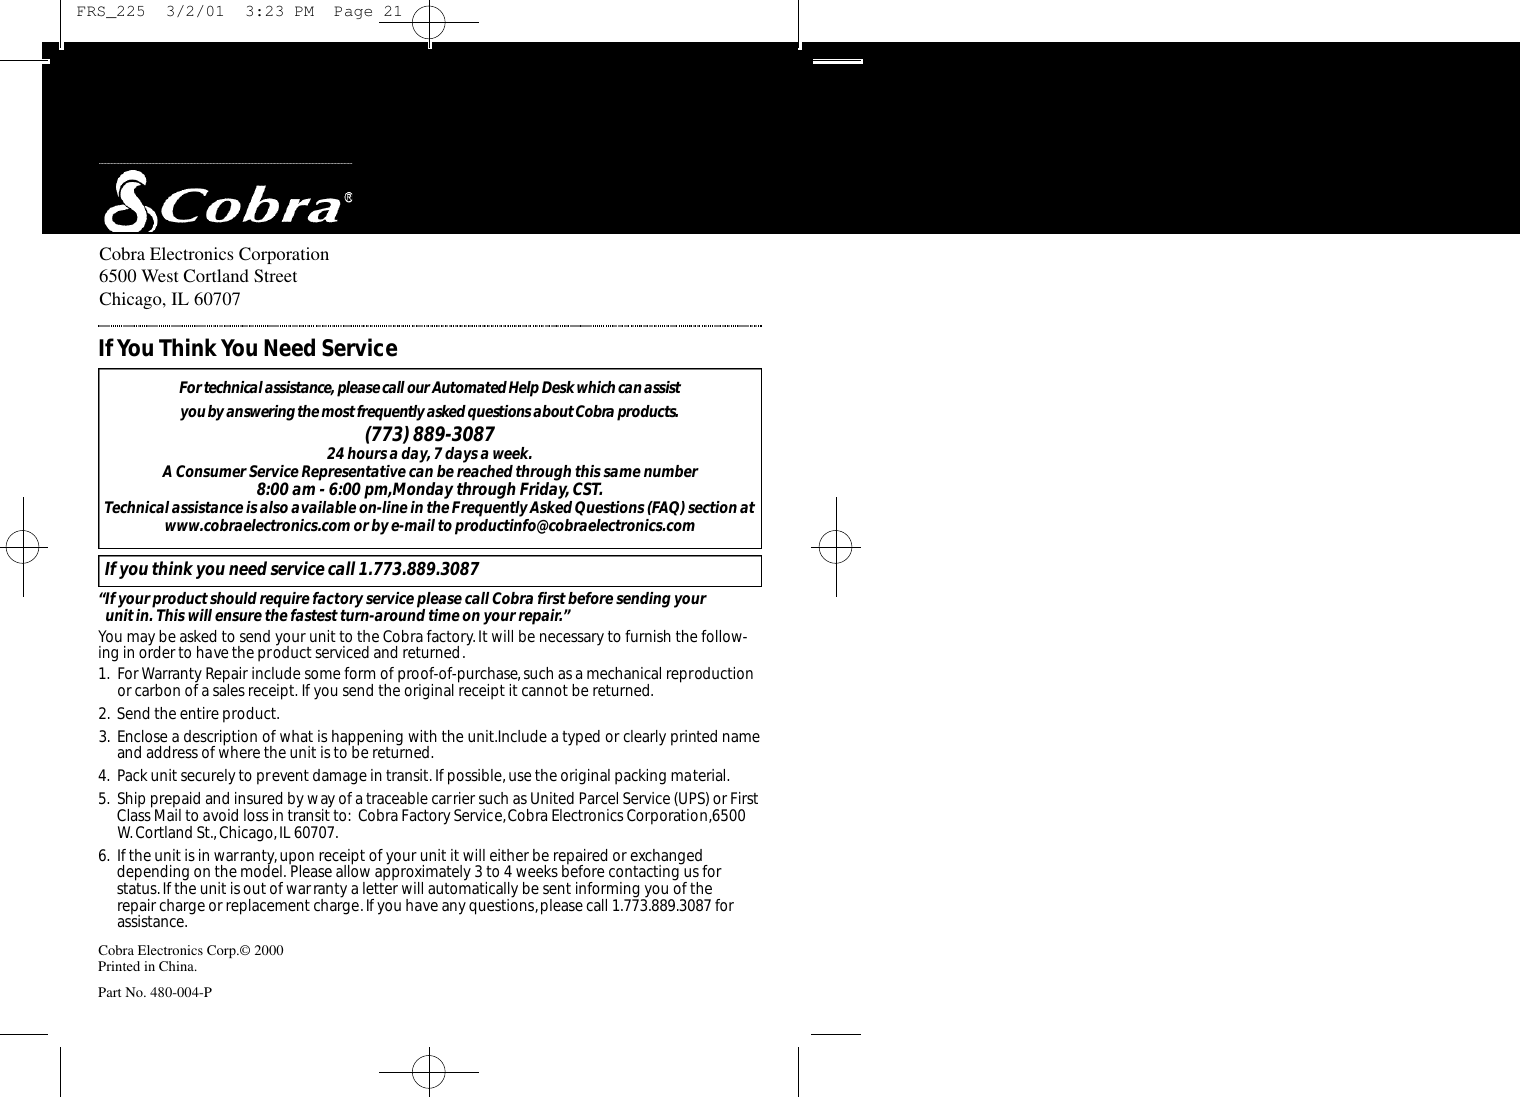 Cobra Electronics Corporation6500 West Cortland StreetChicago, IL 60707Cobra Electronics Corp.© 2000Printed in China.Part No. 480-004-PFor te c h n i c al assistance, please call our Au to m a t ed Help Desk which can assist you by answering the most fre q u e n t l y asked questions about Co b ra prod u ct s.(773) 889-3087 24 hours a day, 7 days a week.A Consumer Service Representative can be reached through this same number 8:00 am - 6:00 pm,Monday through Friday,CST.Technical assistance is also available on-line in the Frequently Asked Questions (FAQ) section atwww.cobraelectronics.com or by e-mail to productinfo@cobraelectronics.comIf you think you need service call 1.773.889.3087“If your product should require factory service please call Cobra first before sending your unit in. This will ensure the fastest turn-around time on your repair.”You may be asked to send your unit to the Cobra factory.It will be necessary to furnish the follow-ing in order to have the product serviced and returned.1. For Warranty Repair include some form of proof-of-purchase, such as a mechanical reproductionor carbon of a sales receipt. If you send the original receipt it cannot be returned.2. Send the entire product.3. Enclose a description of what is happening with the unit.Include a typed or clearly printed nameand address of where the unit is to be returned.4. Pack unit securely to prevent damage in transit. If possible, use the original packing material.5. Ship prepaid and insured by way of a traceable carrier such as United Parcel Service (UPS) or FirstClass Mail to avoid loss in transit to: Cobra Factory Service,Cobra Electronics Corporation,6500W.Cortland St.,Chicago,IL 60707.6. If the unit is in warranty,upon receipt of your unit it will either be repaired or exchangeddepending on the model. Please allow approximately 3 to 4 weeks before contacting us for status.If the unit is out of warranty a letter will automatically be sent informing you of the repair charge or replacement charge.If you have any questions,please call 1.773.889.3087 forassistance.IfYou Think You Need Service FRS_225  3/2/01  3:23 PM  Page 21